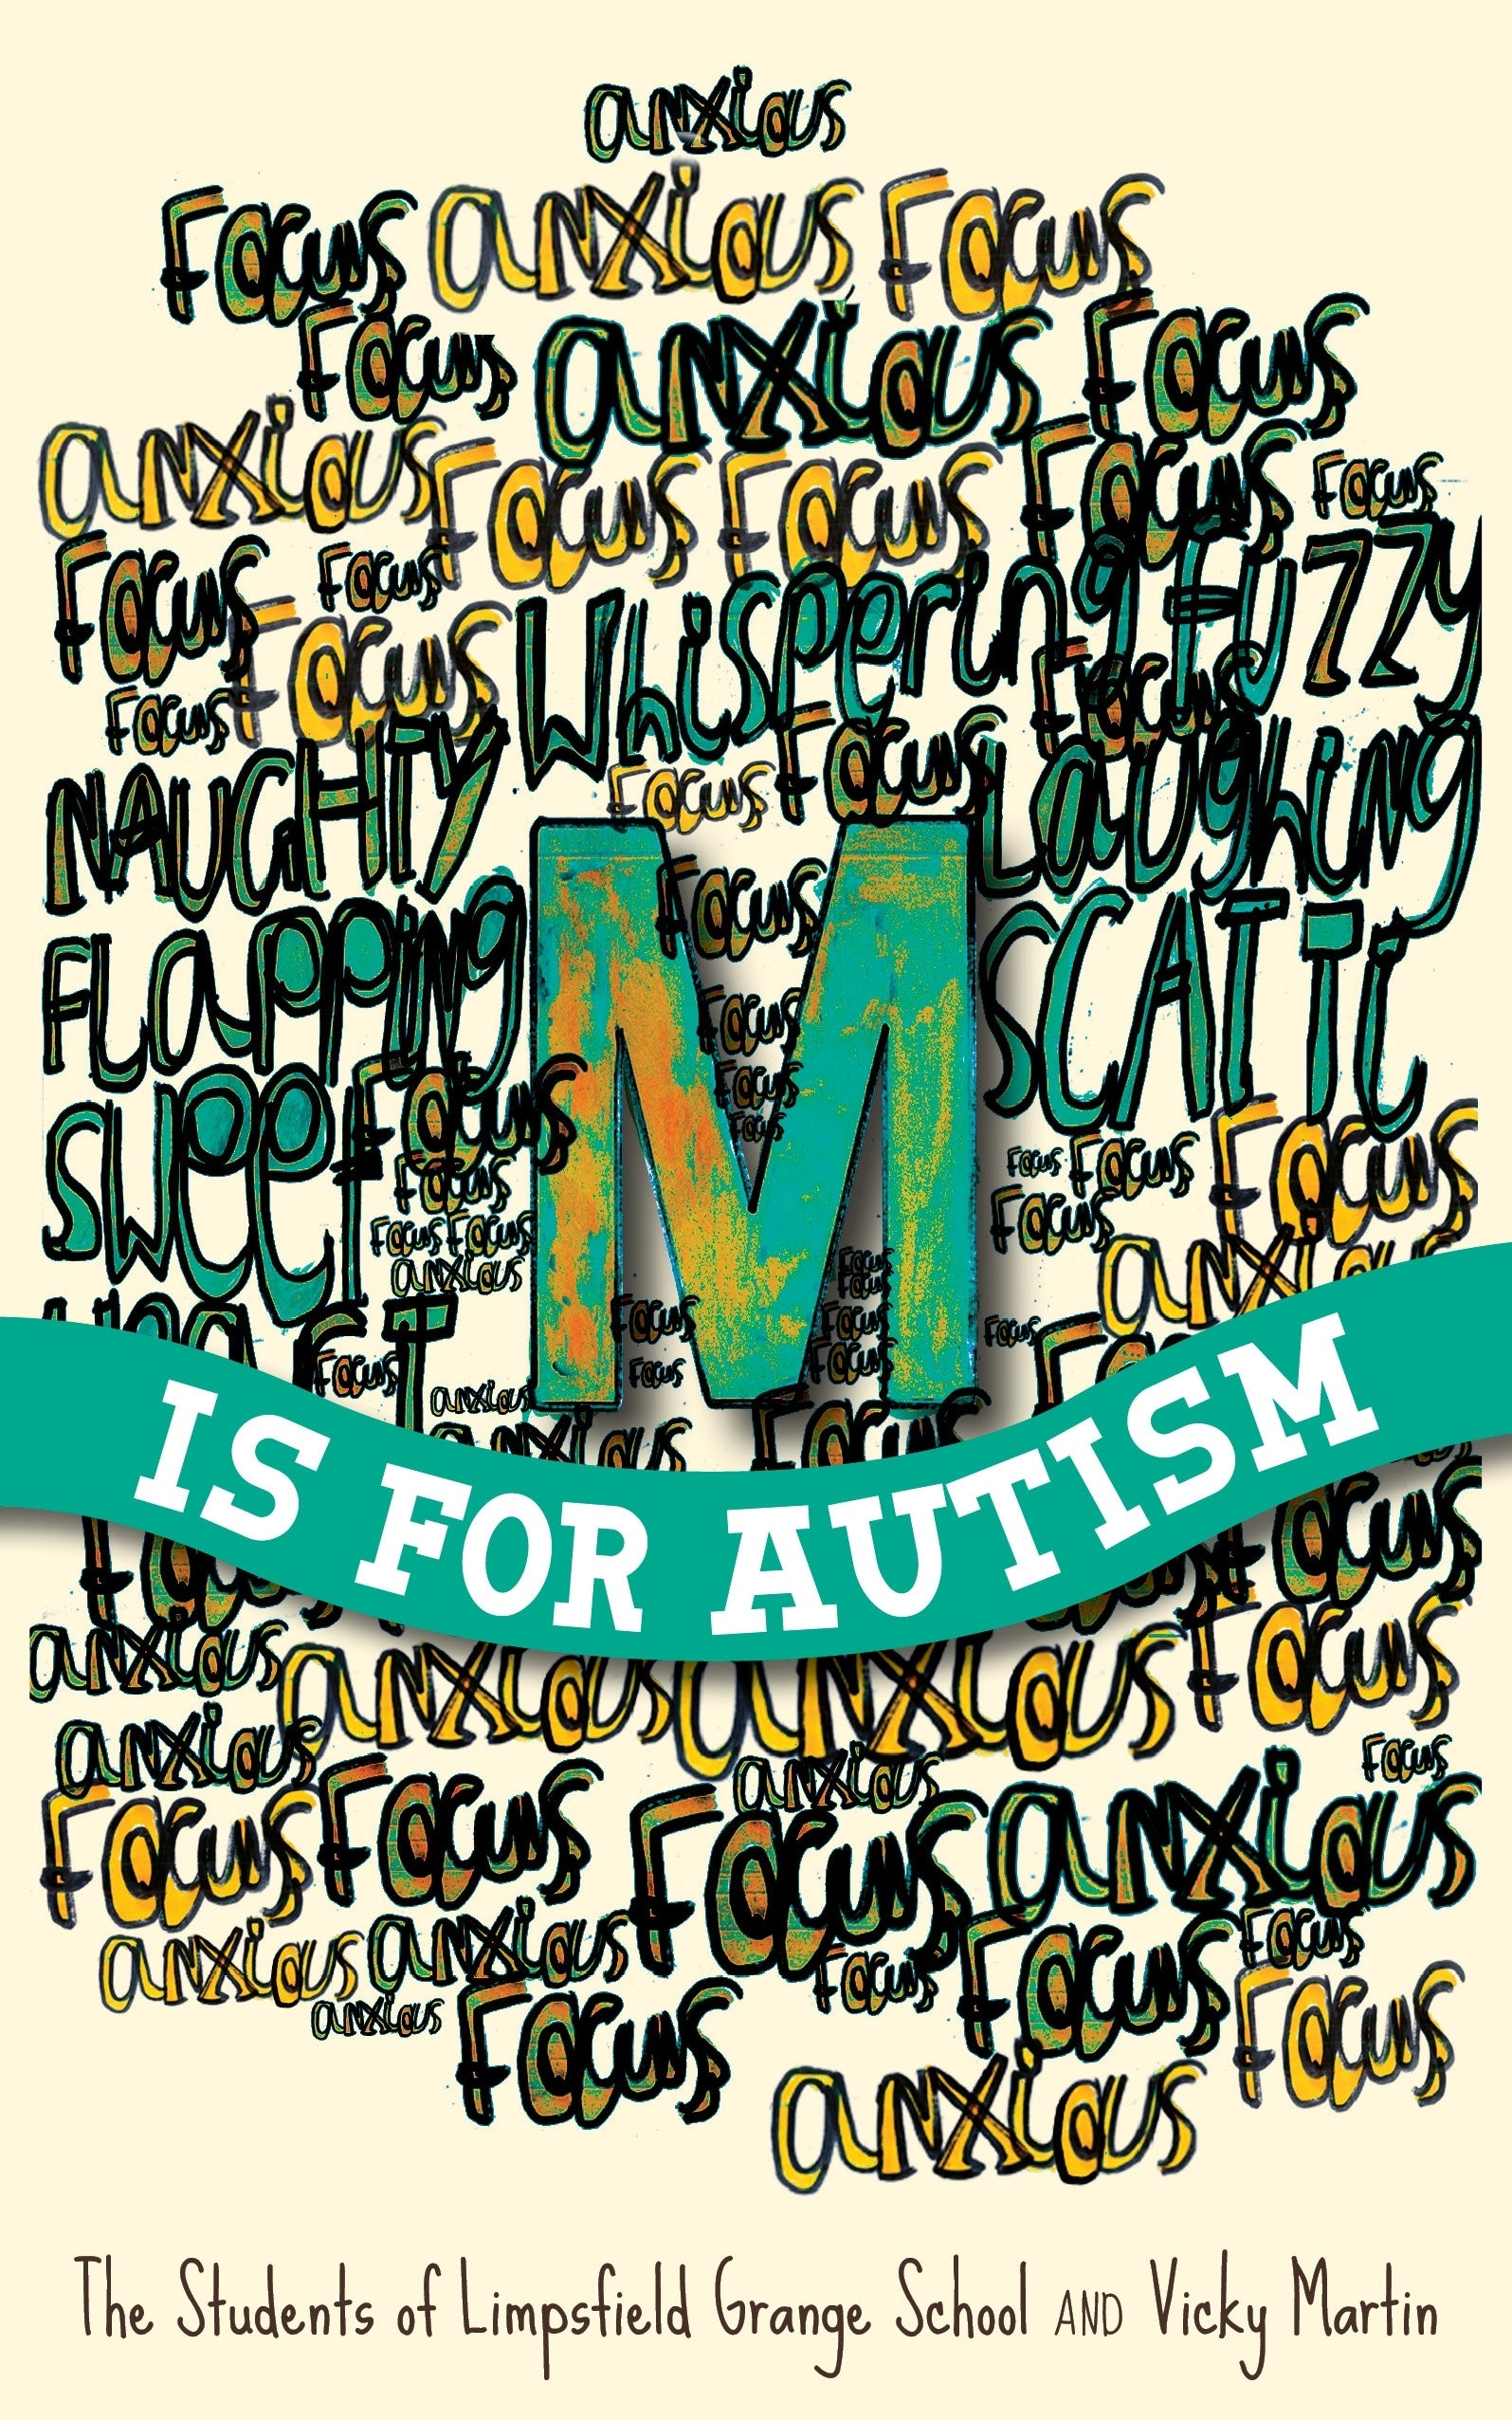 M is for Autism by The Students of Limpsfield Grange of Limpsfield Grange School, Vicky Martin, Robert Pritchett